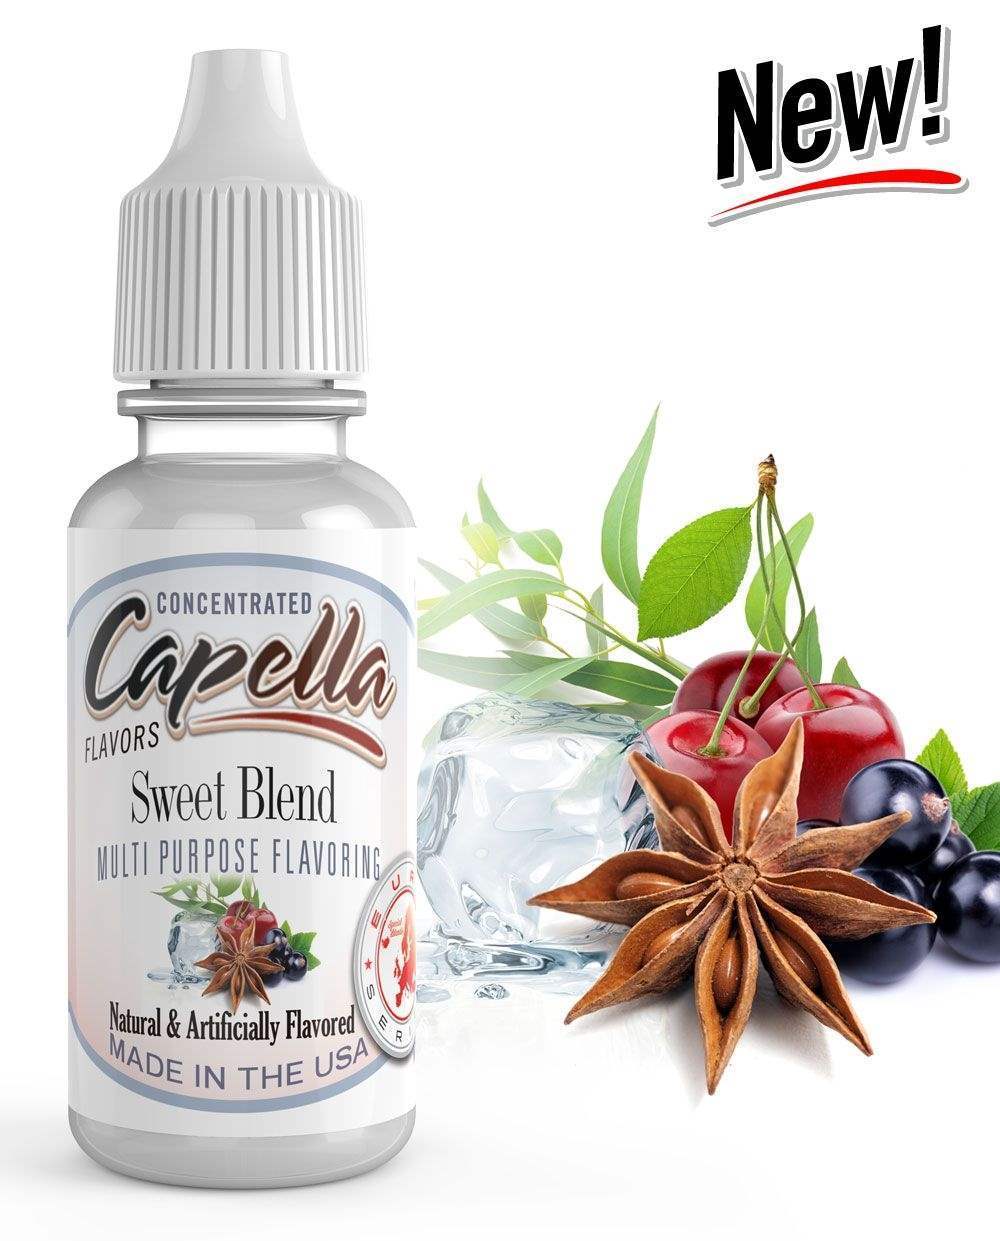 Capella Sweet Blend | 10ml Concentrated Flavor for Eliquid | Self Mixing